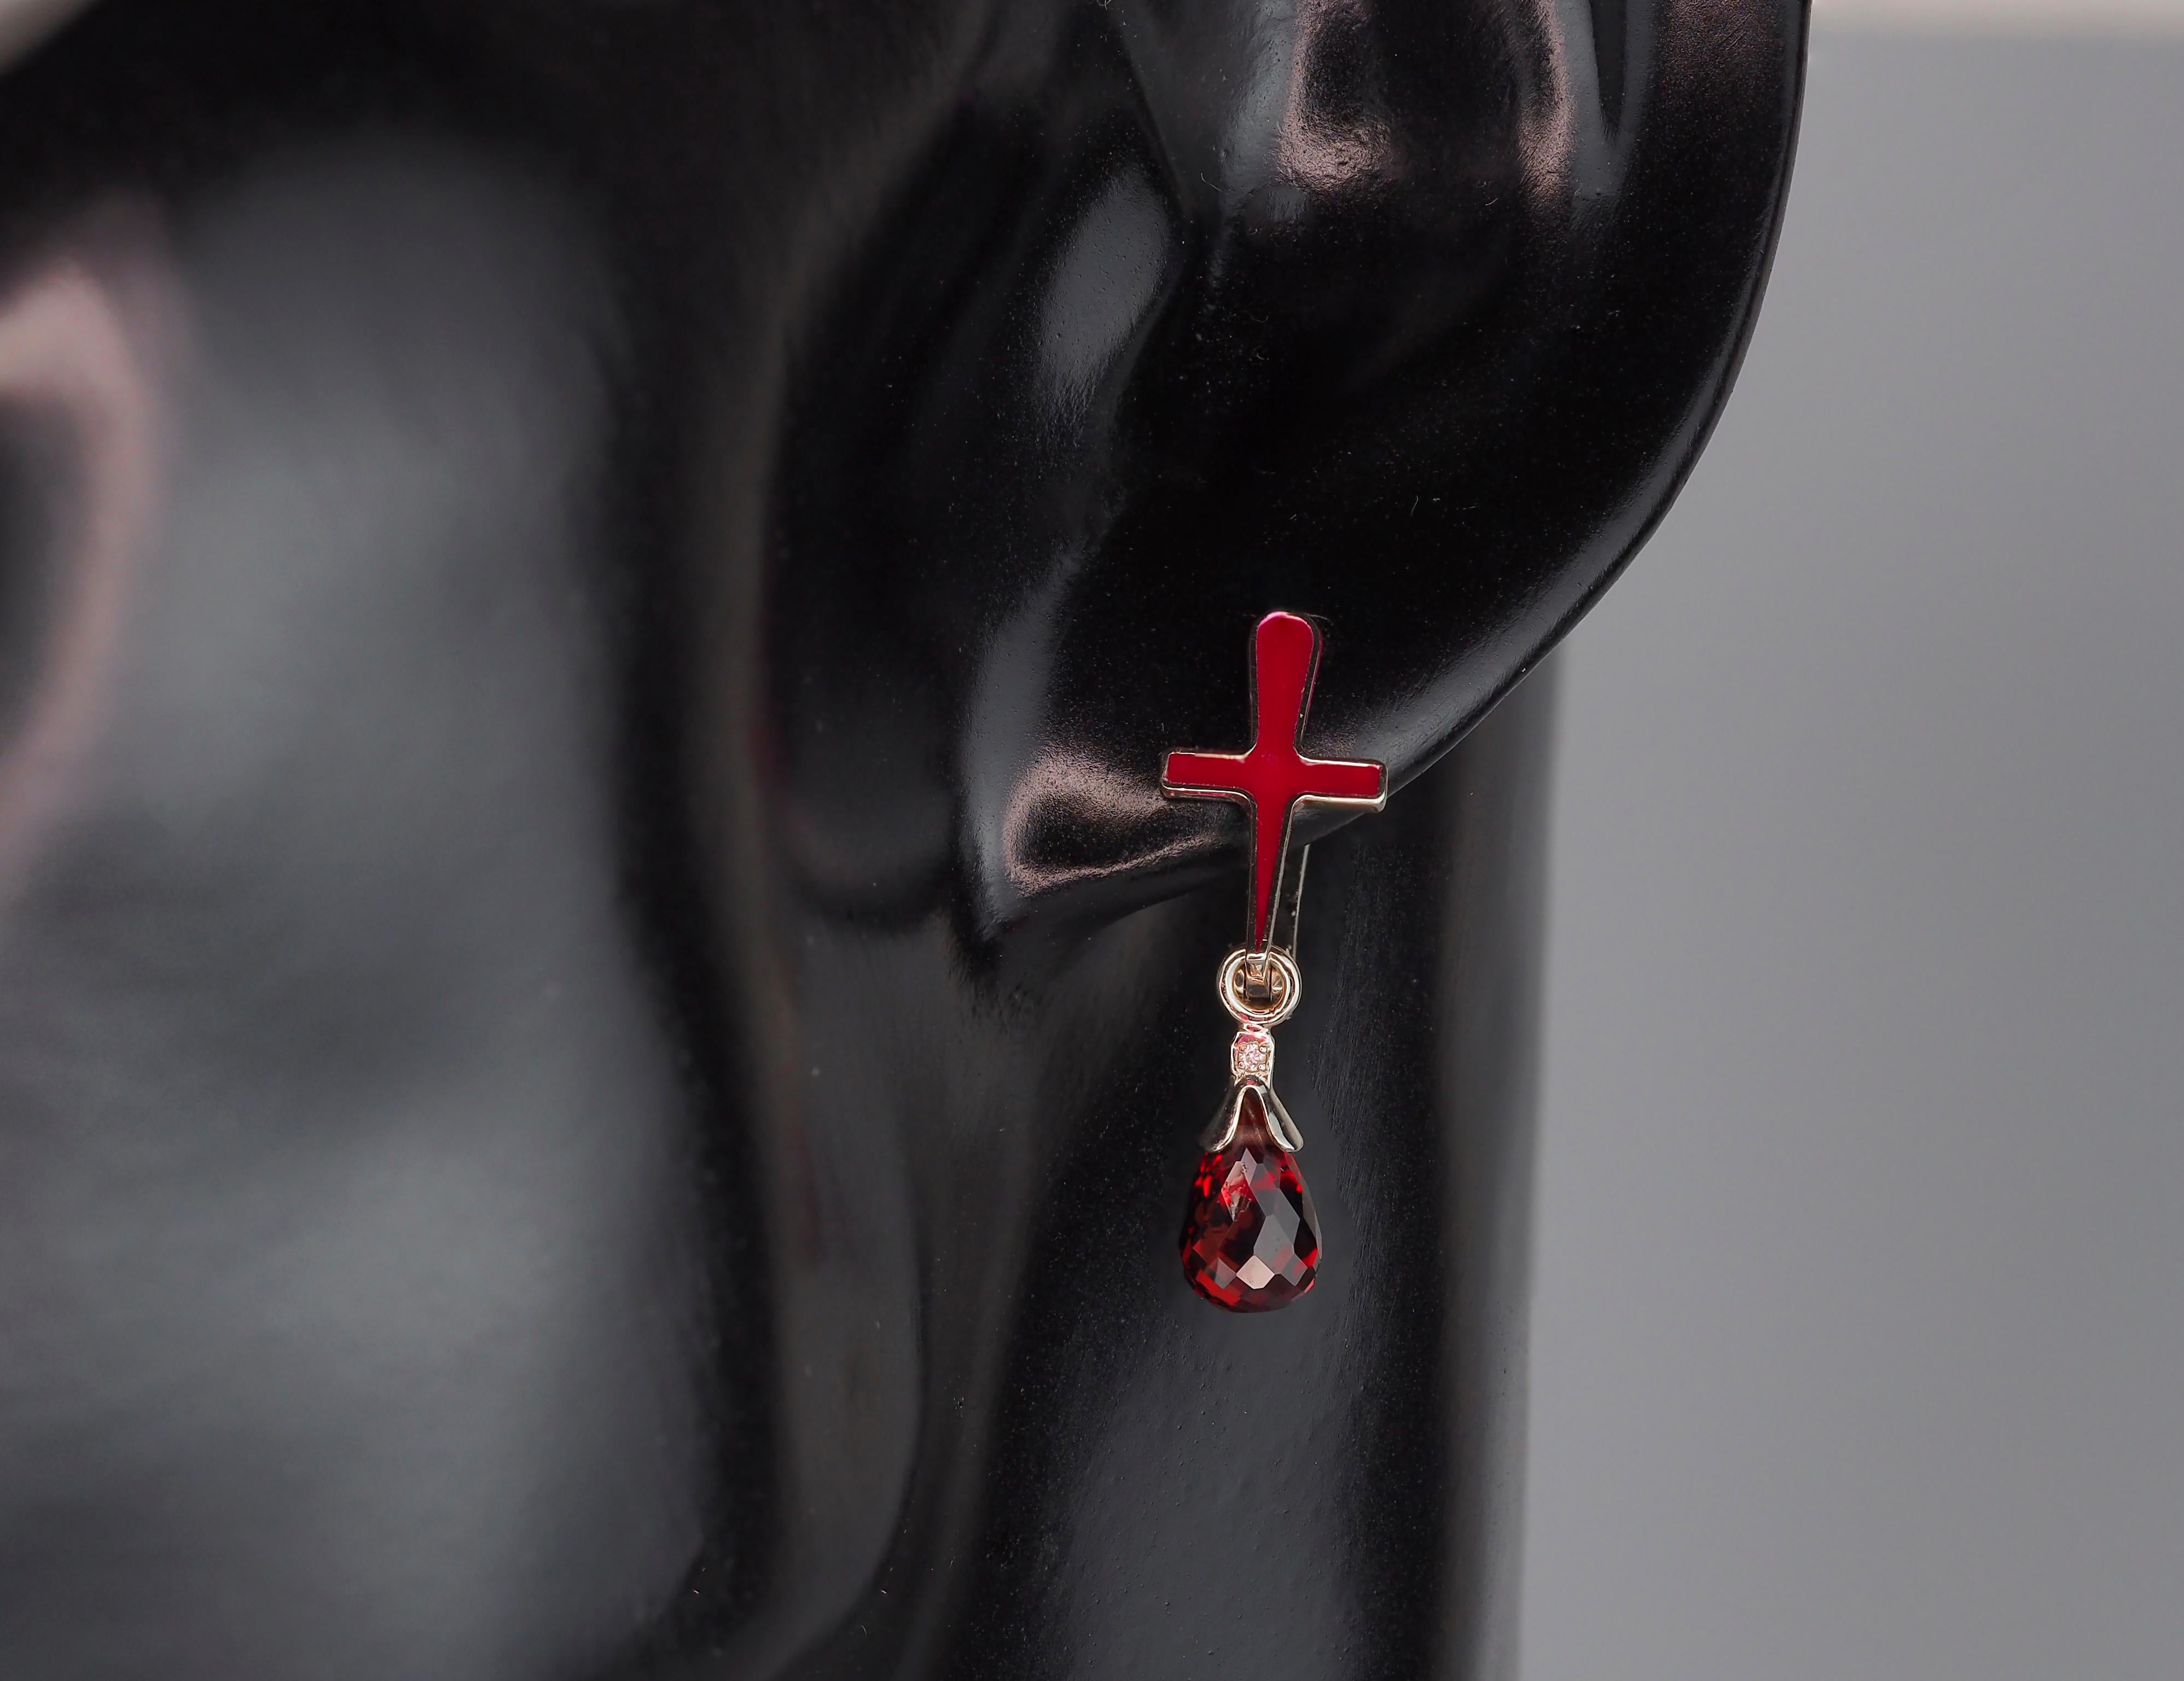 Garnet cross earrings in 14k gold. Red cross enamel earrings with garnet. Garnet briolette gold earrings.
Material: 14k gold.
Weight: 2.5 gr.
Size Earrings: 28x9 mm
Central stones: Natural Garnet - 2 pieces 
Cut: Briolette
Weight: aprx 2.4 ct.